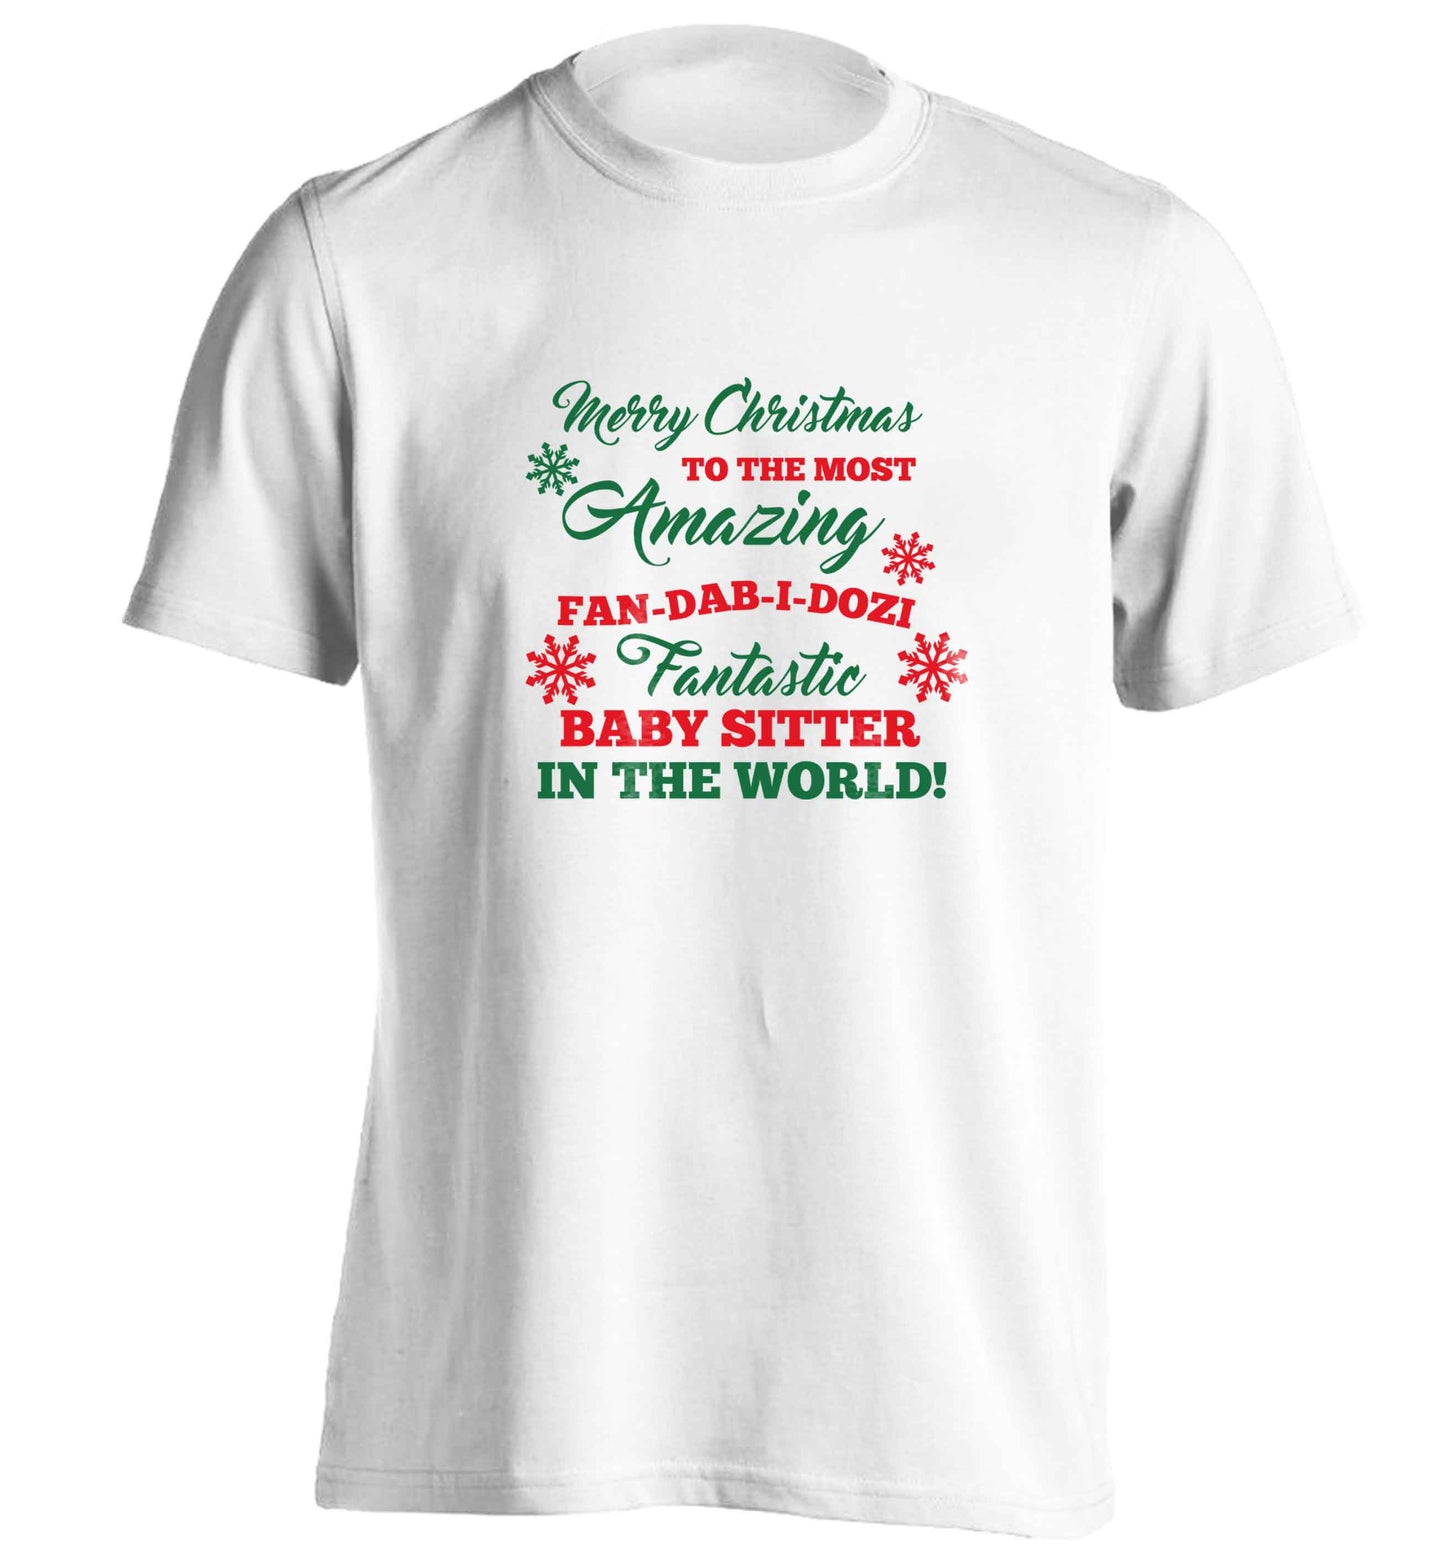 Merry Christmas to the most amazing fan-dab-i-dozi fantasic baby sitter in the world adults unisex white Tshirt 2XL